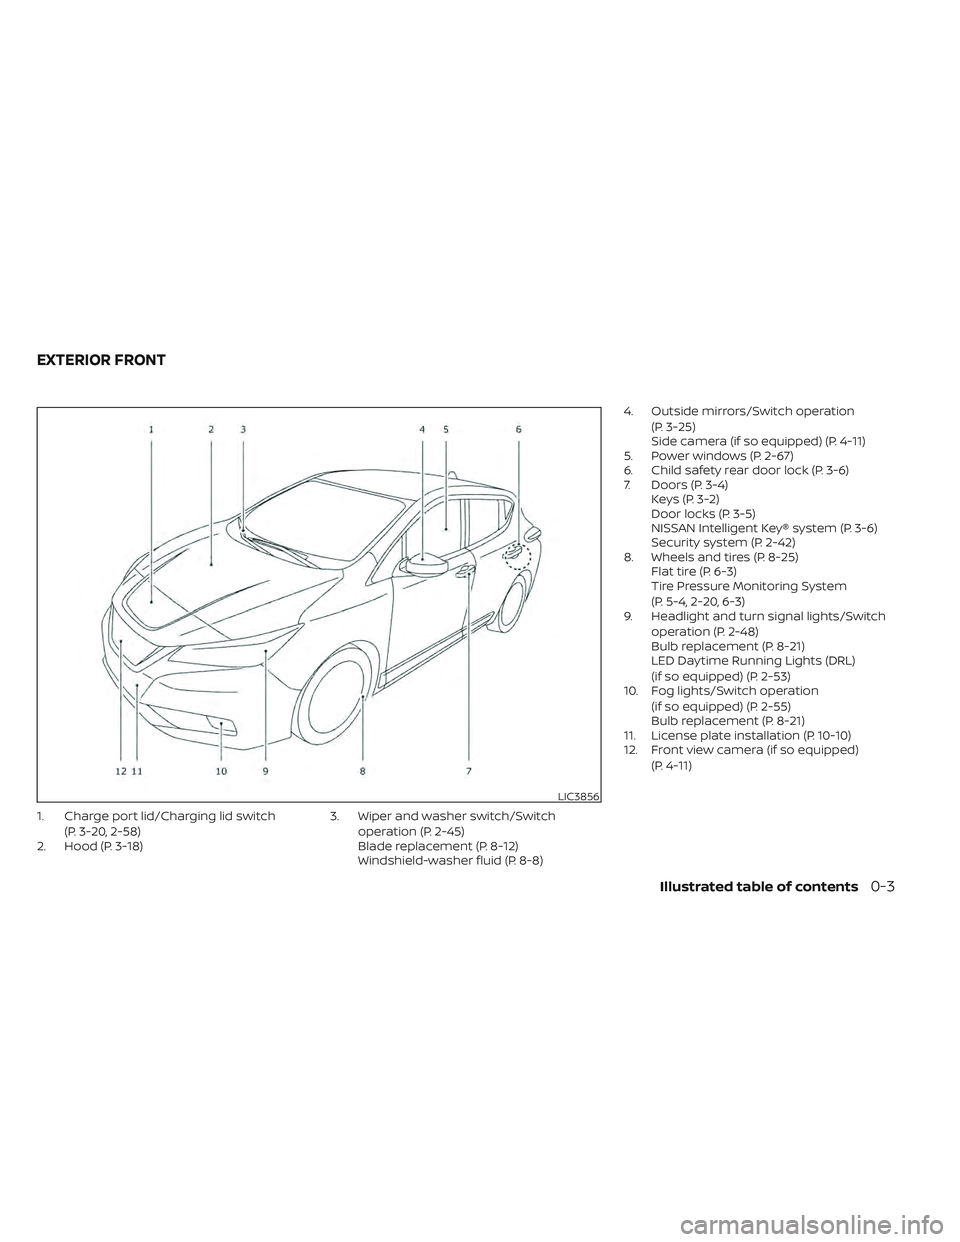 NISSAN LEAF 2022  Owner´s Manual 1. Charge port lid/Charging lid switch(P. 3-20, 2-58)
2. Hood (P. 3-18) 3. Wiper and washer switch/Switch
operation (P. 2-45)
Blade replacement (P. 8-12)
Windshield-washer fluid (P. 8-8) 4. Outside mi